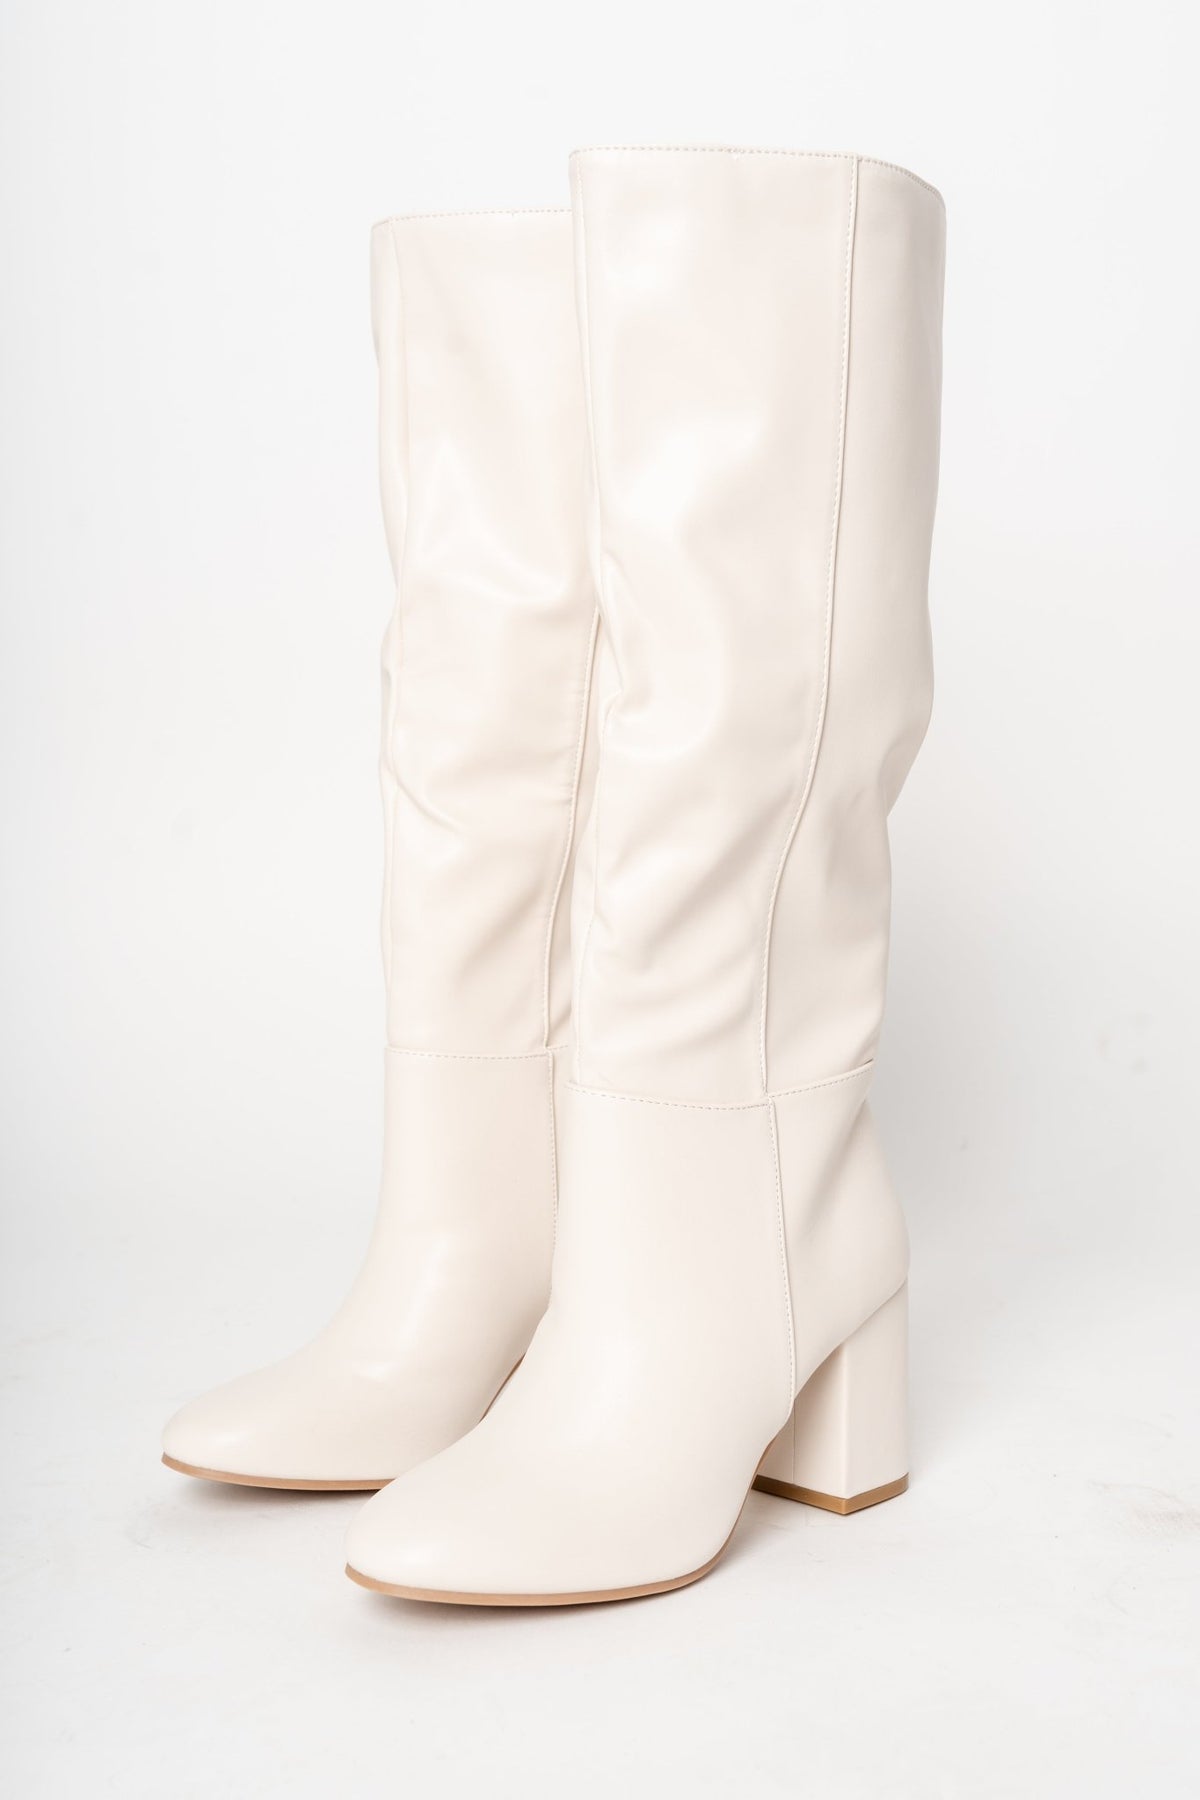 Malone knee high boots off white - Cute shoes - Trendy Shoes at Lush Fashion Lounge Boutique in Oklahoma City